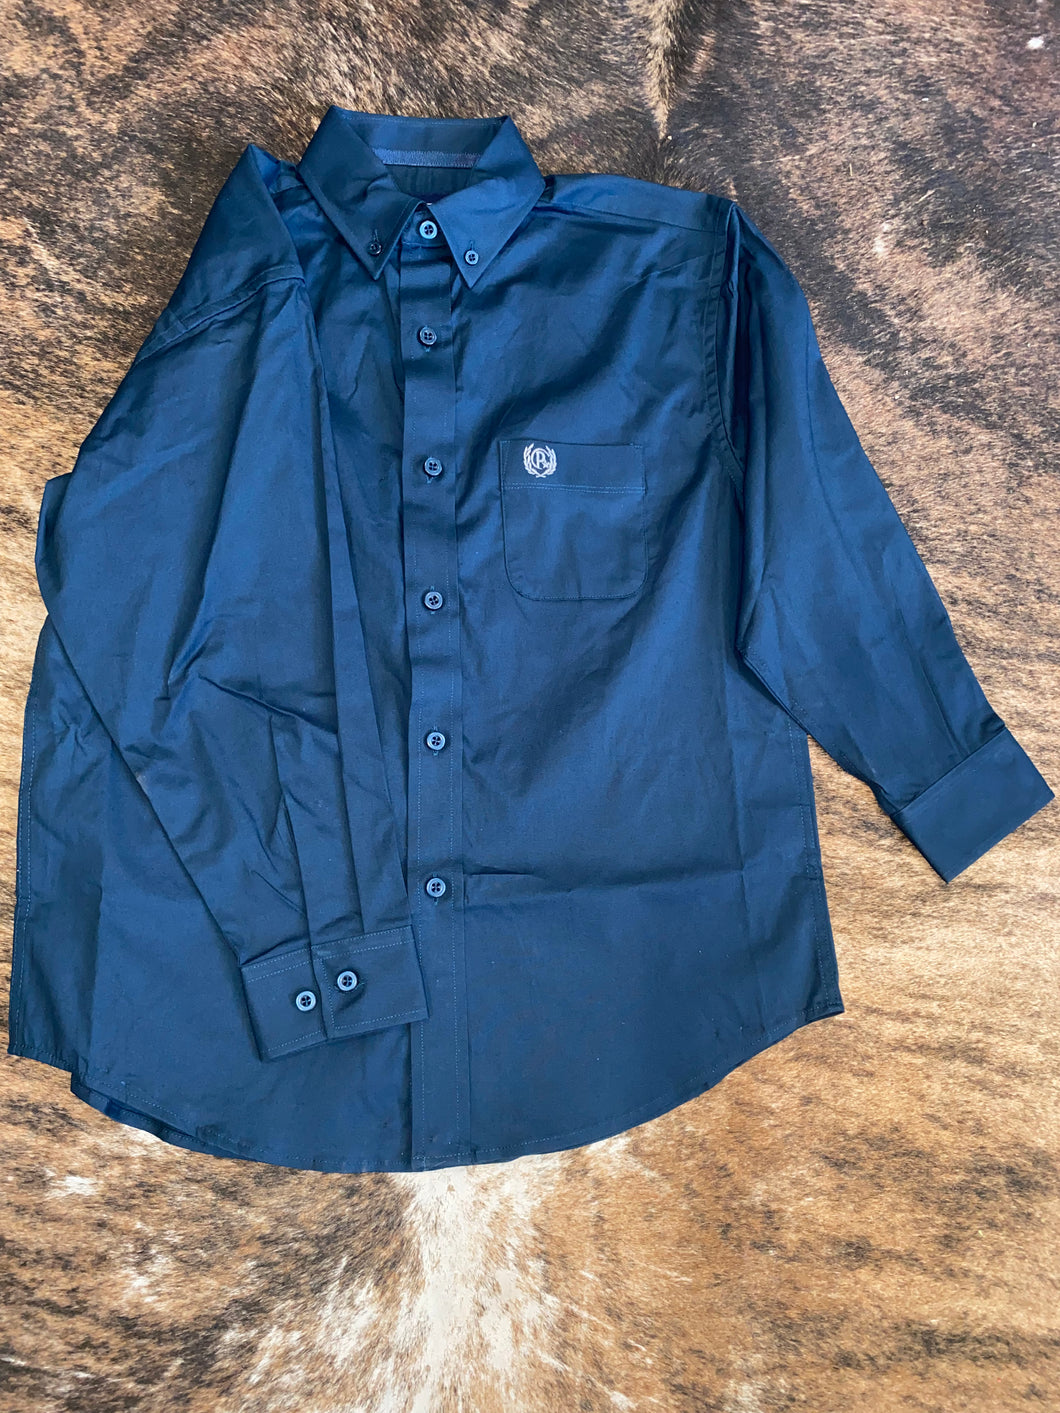 Panhandle Boy's Solid Western Shirt